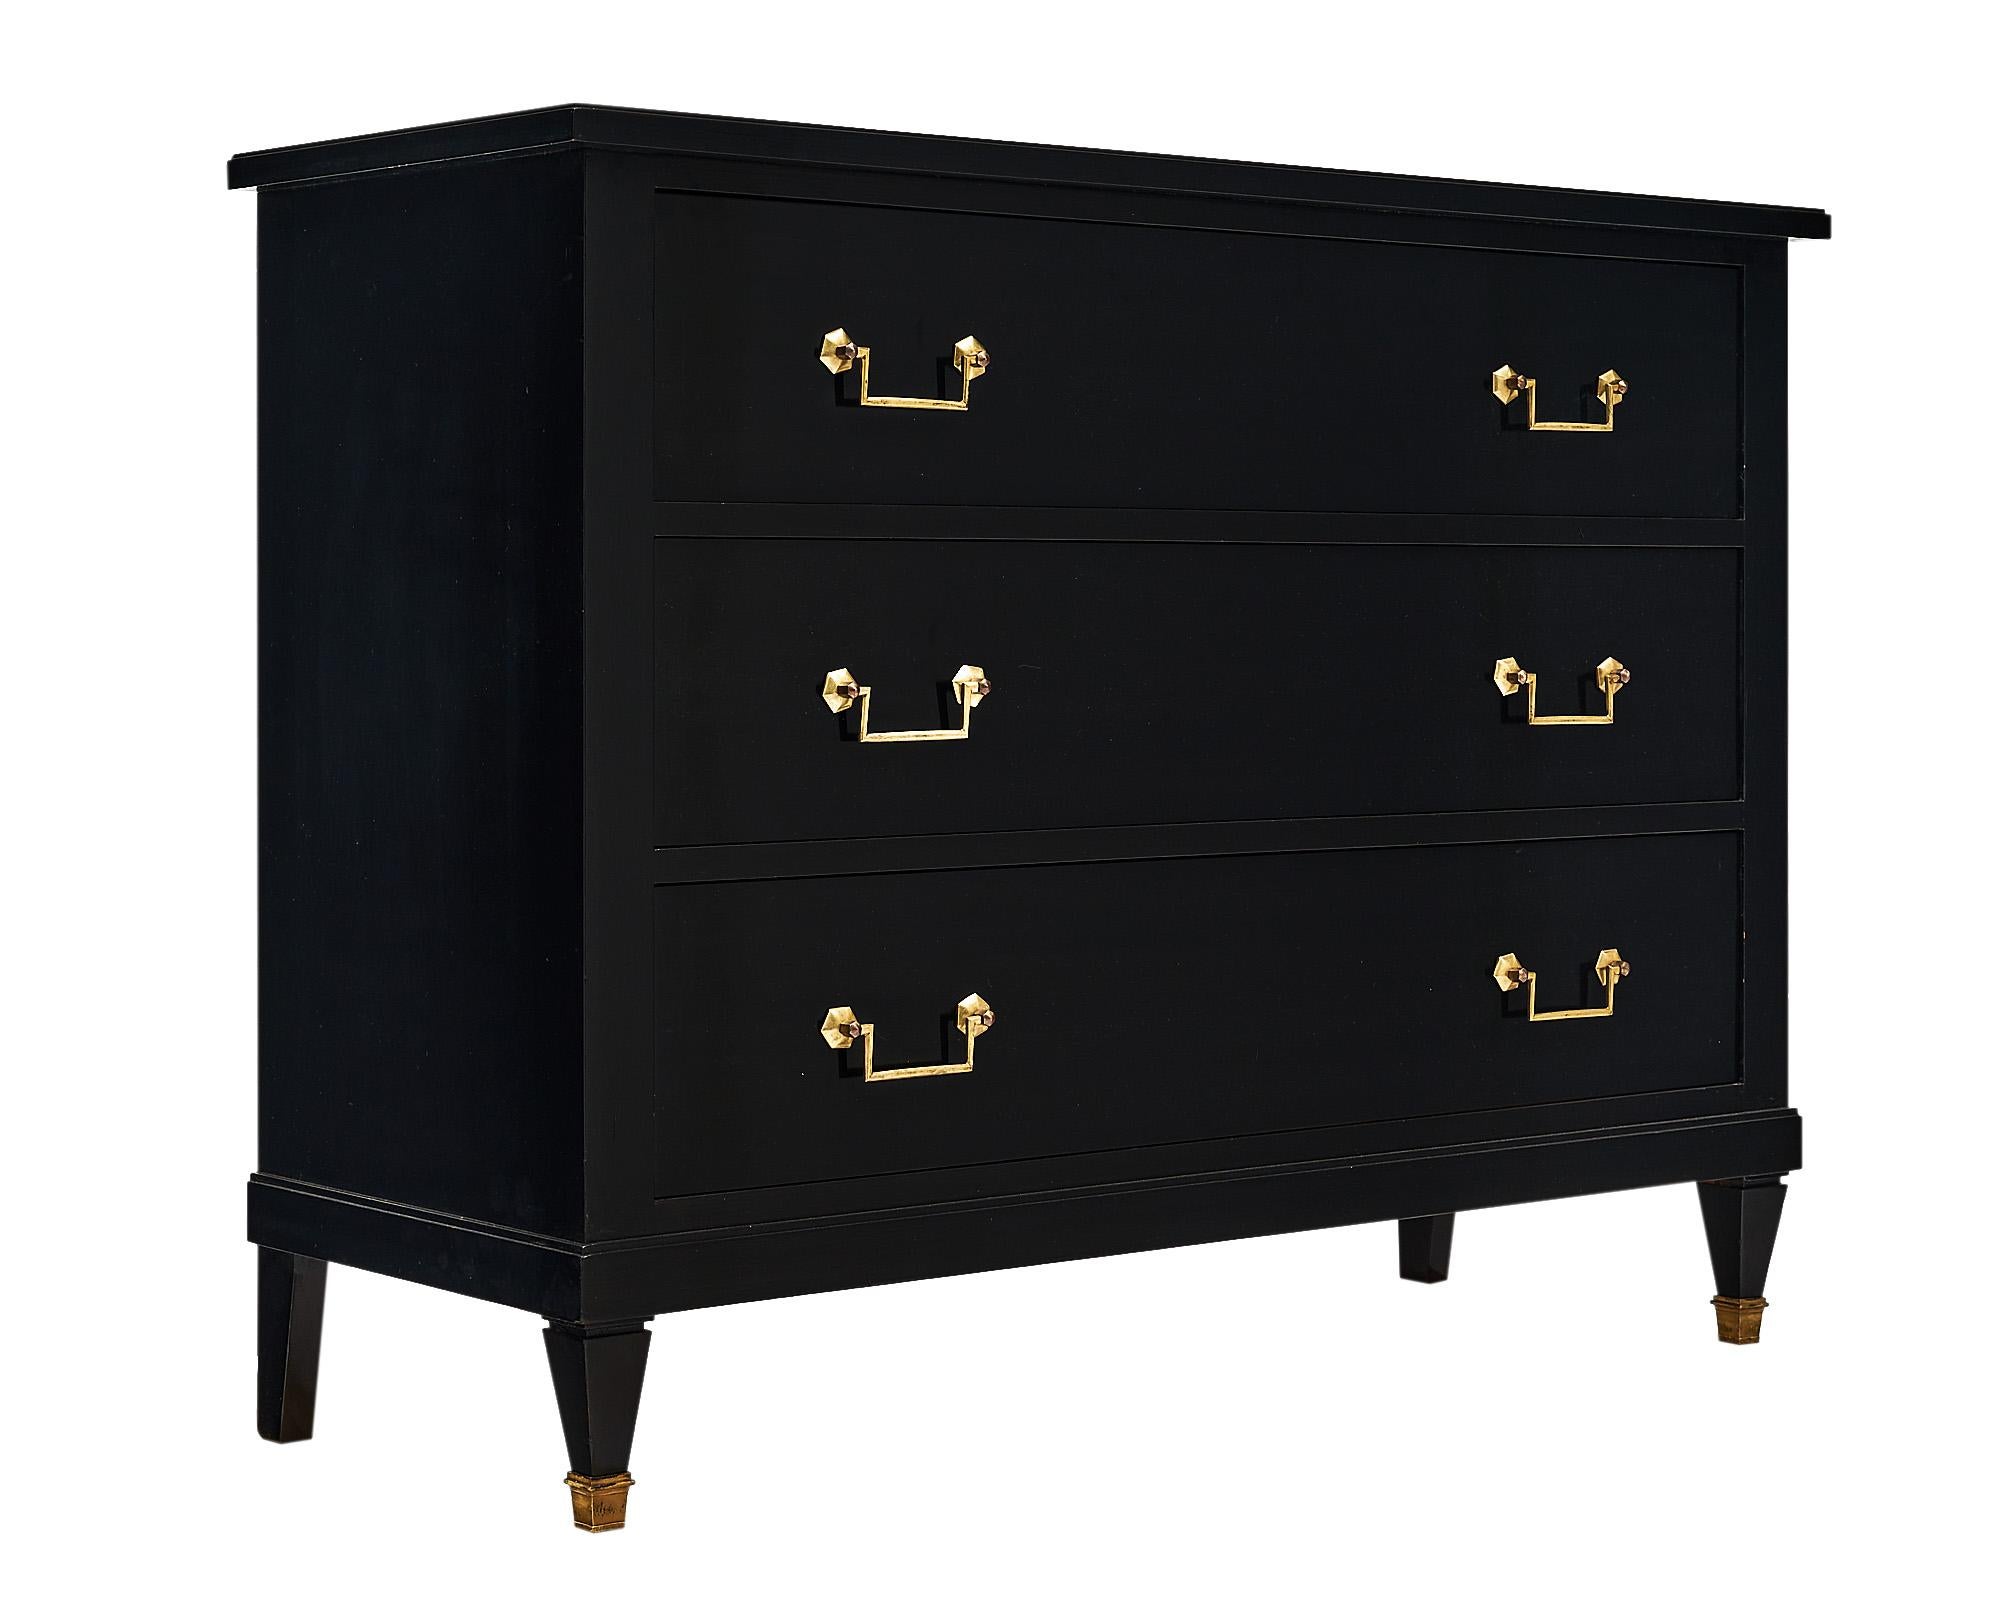 Chest of drawers, French, made of mahogany that has been ebonized and finished with a lustrous French polish. This piece has three dovetailed drawers and gilt brass handles. The clean lines lend itself perfectly to many functions. It is supported by